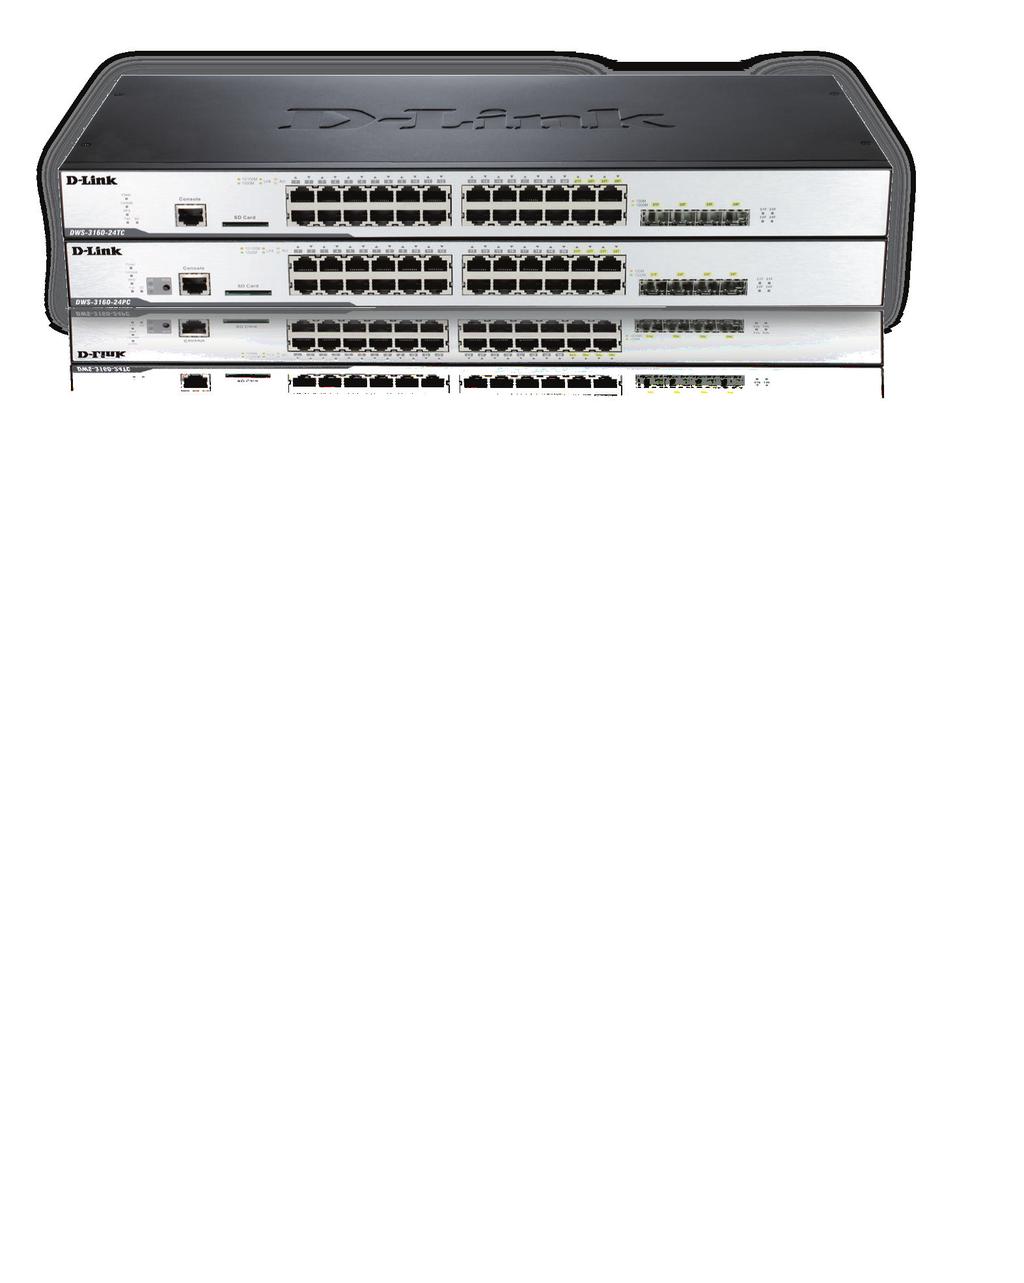 Advanced Switching and Routing VLAN routing RIP v1/v2 support Spanning tree IGMP/MLD snooping IPv6 ready 802.